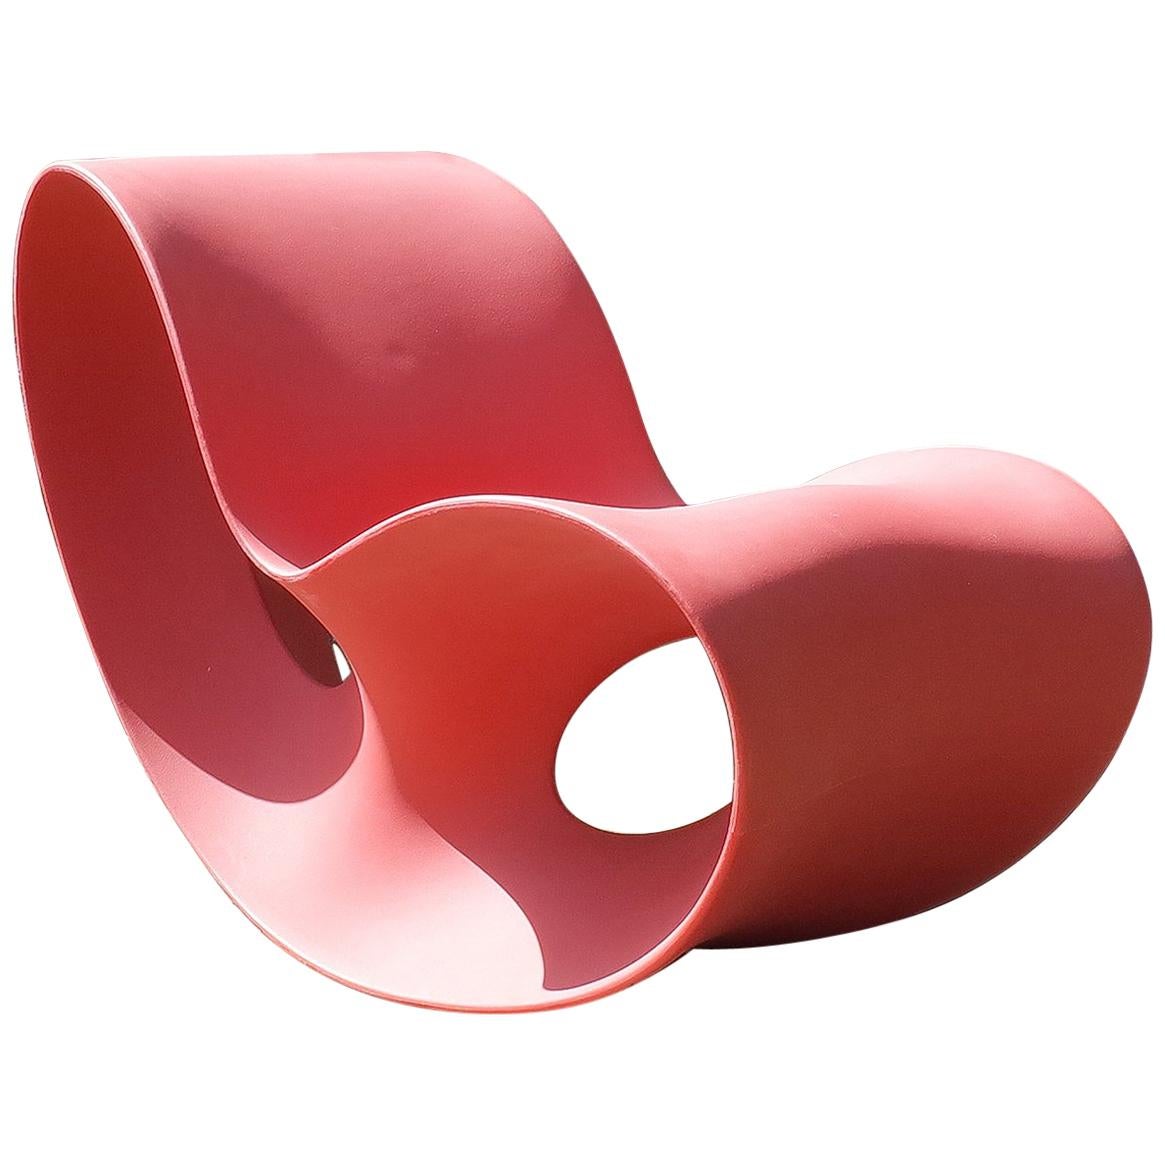 Red Voido Rocking Chair by Ron Arad for Magis, 2006-2008